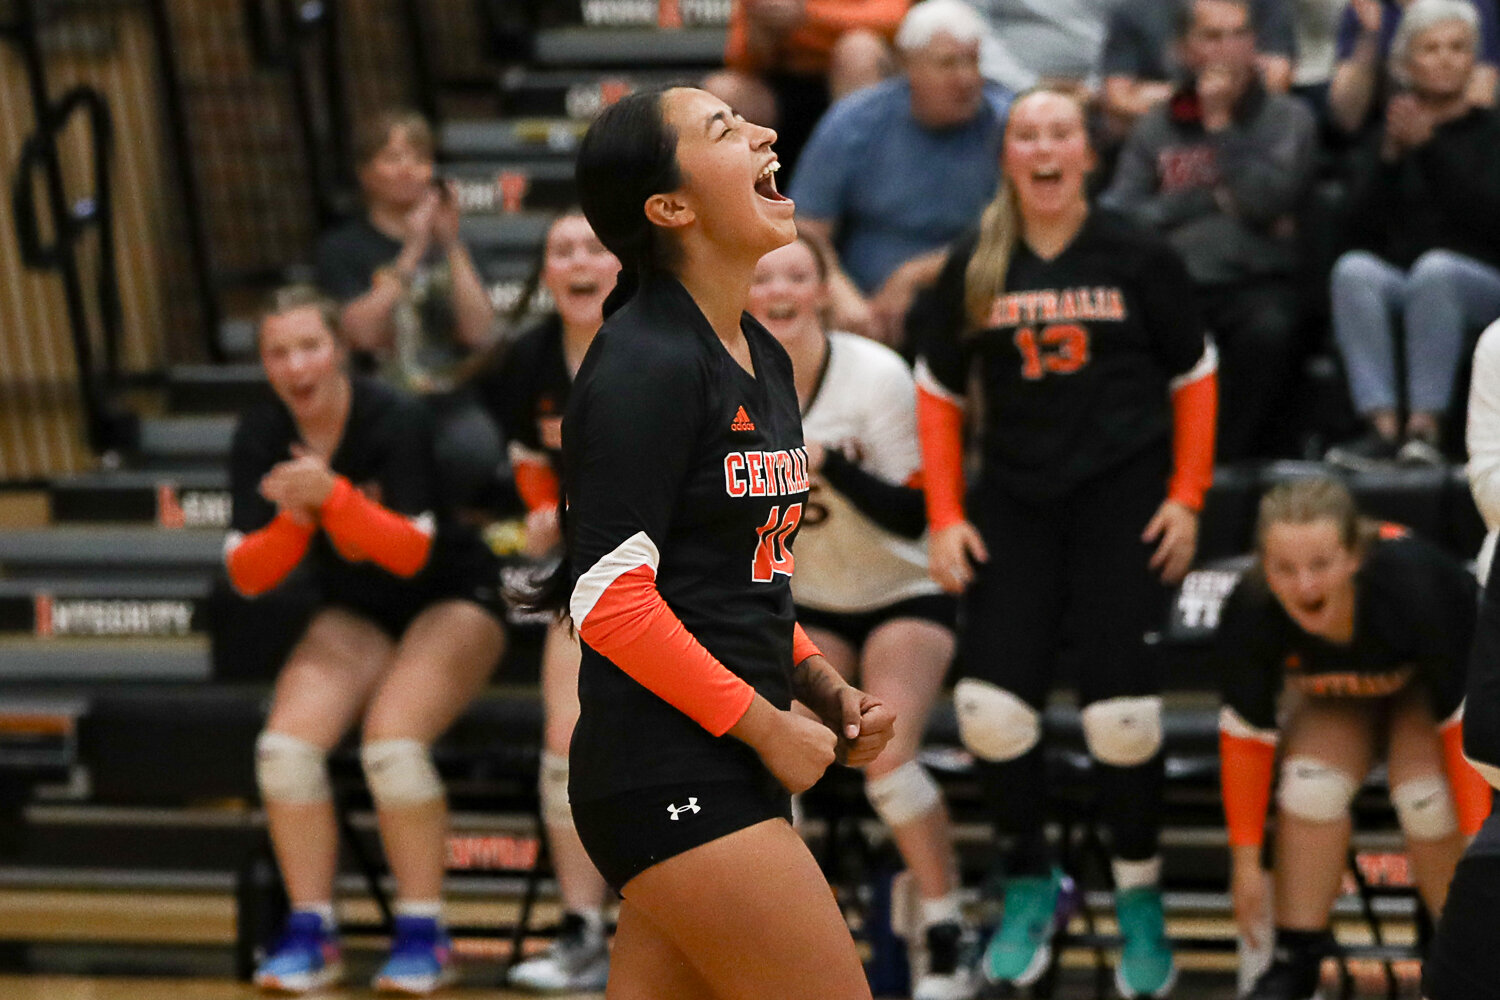 Makayla Chavez celebrates one of her seven aces during Centralia's win over W.F. West on Sept. 21.